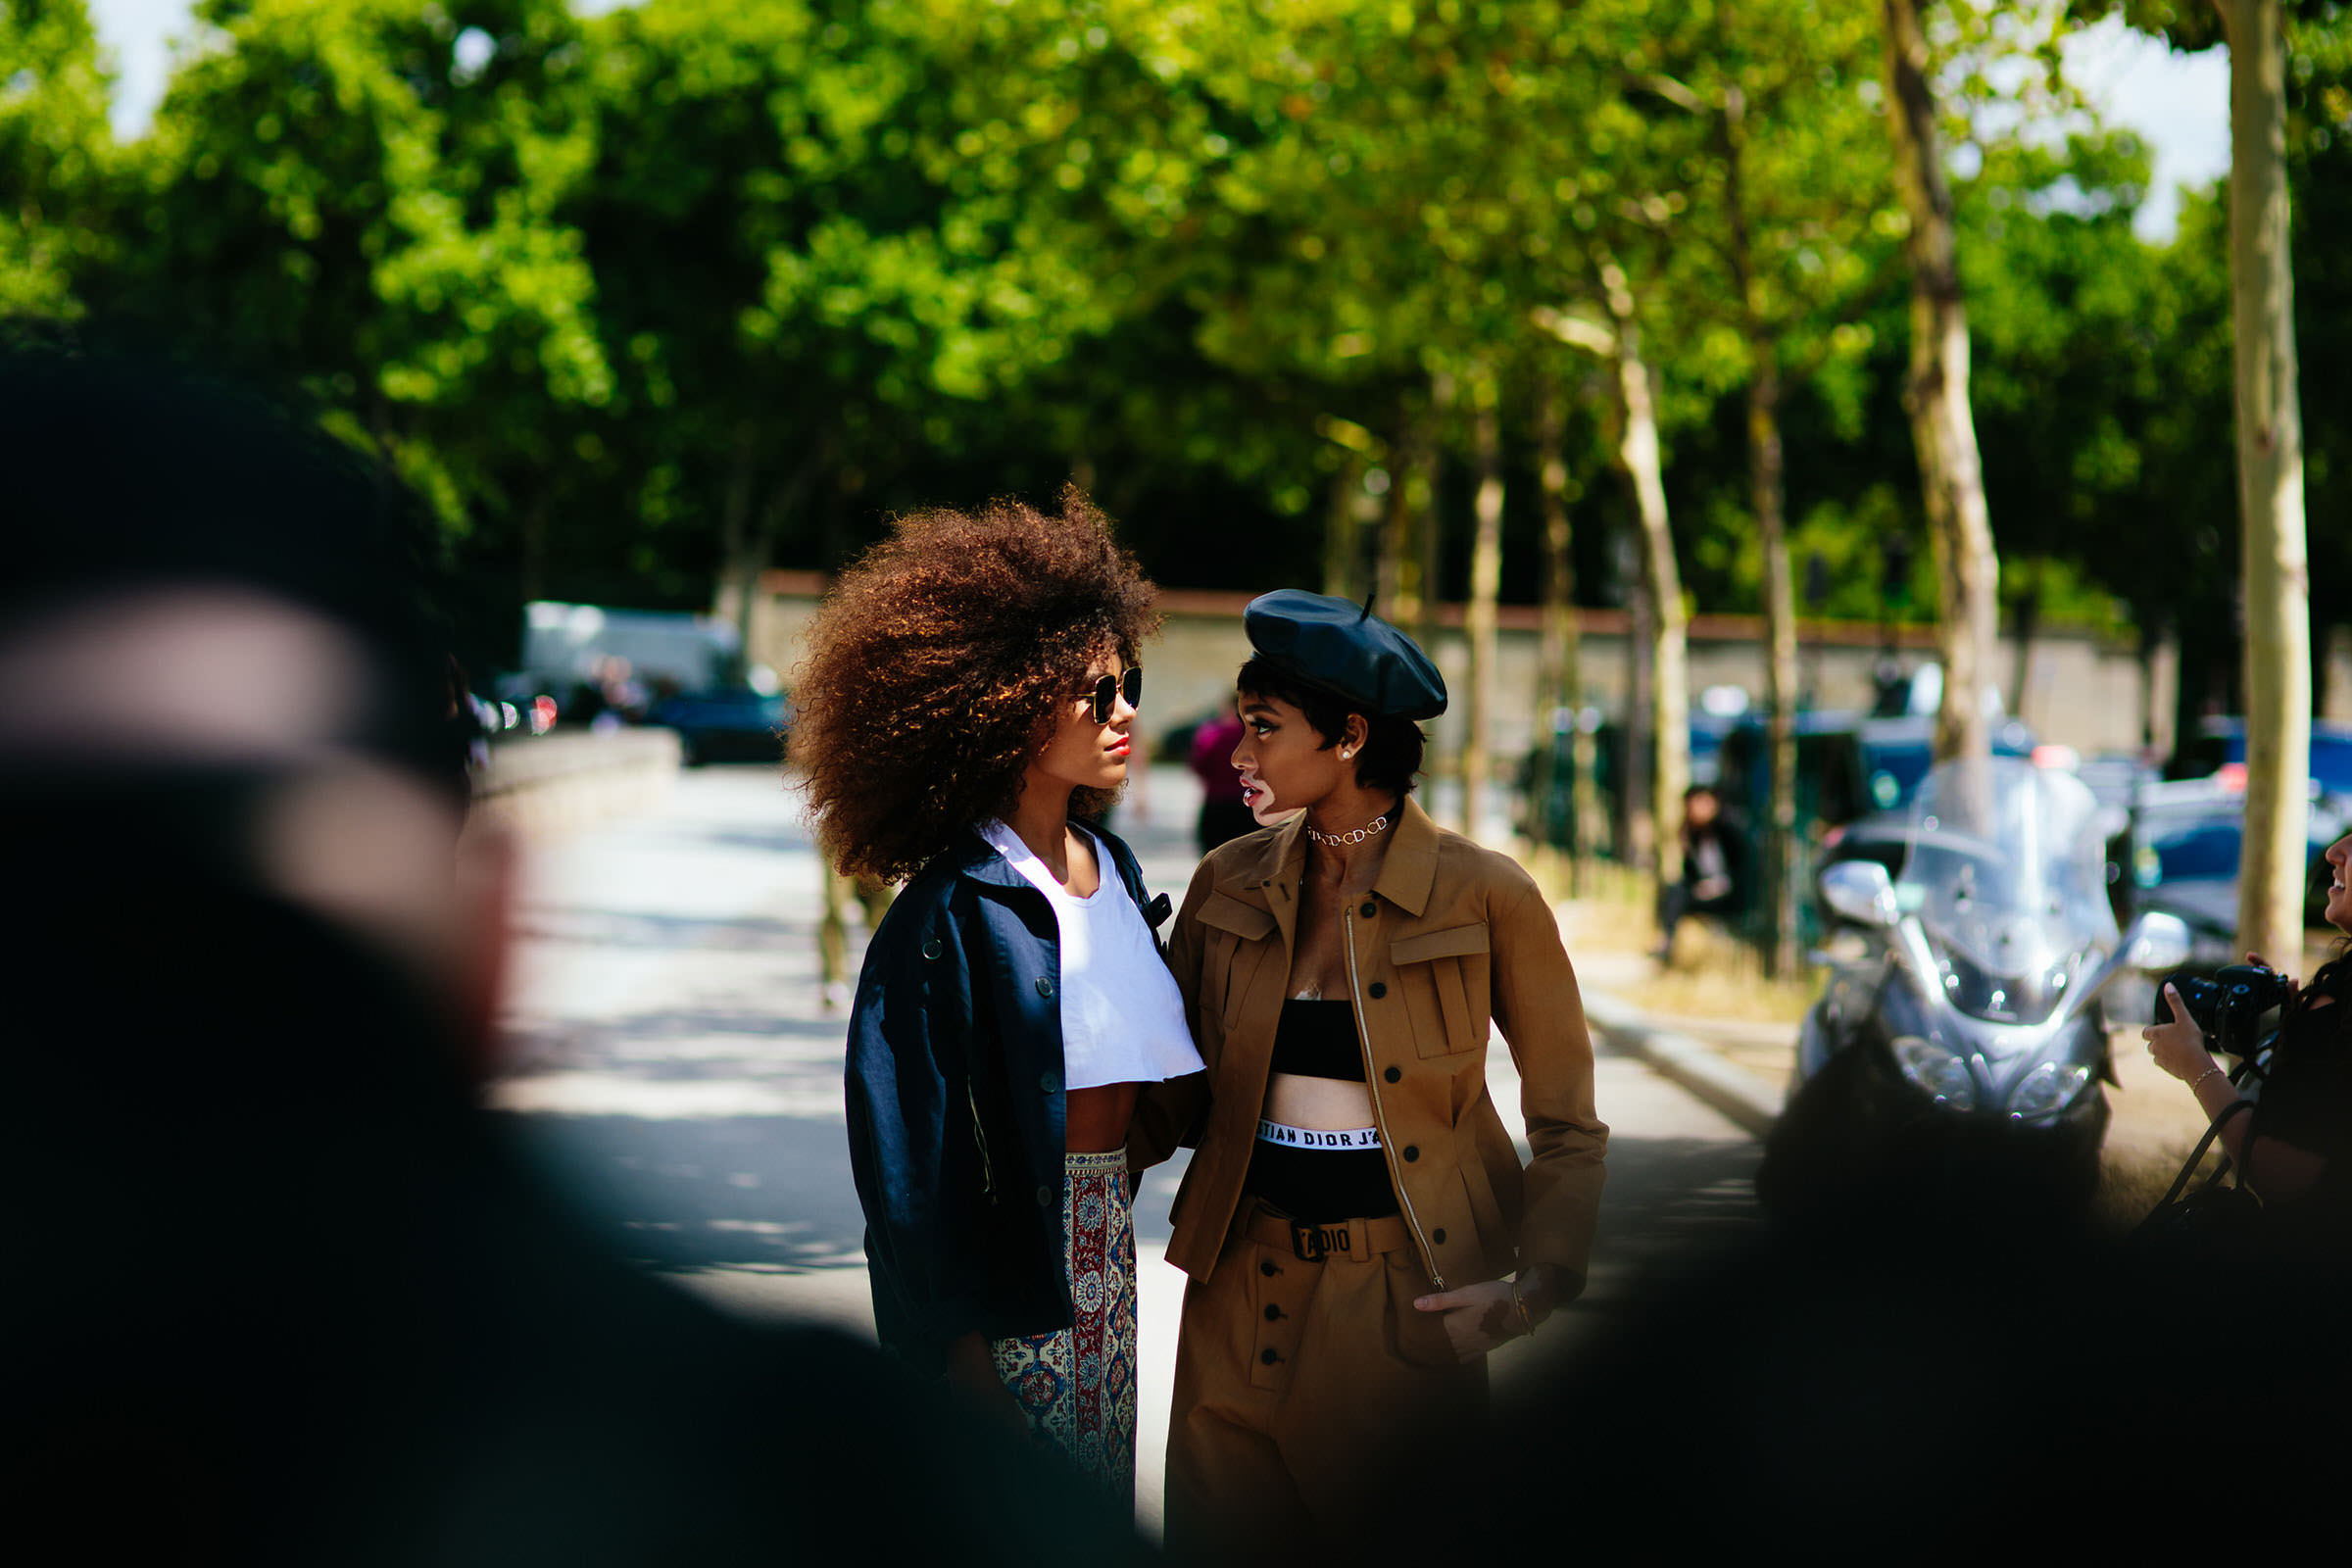 Model Winnie Harlow with a friend before the Dior FW17 Couture show in Paris, France